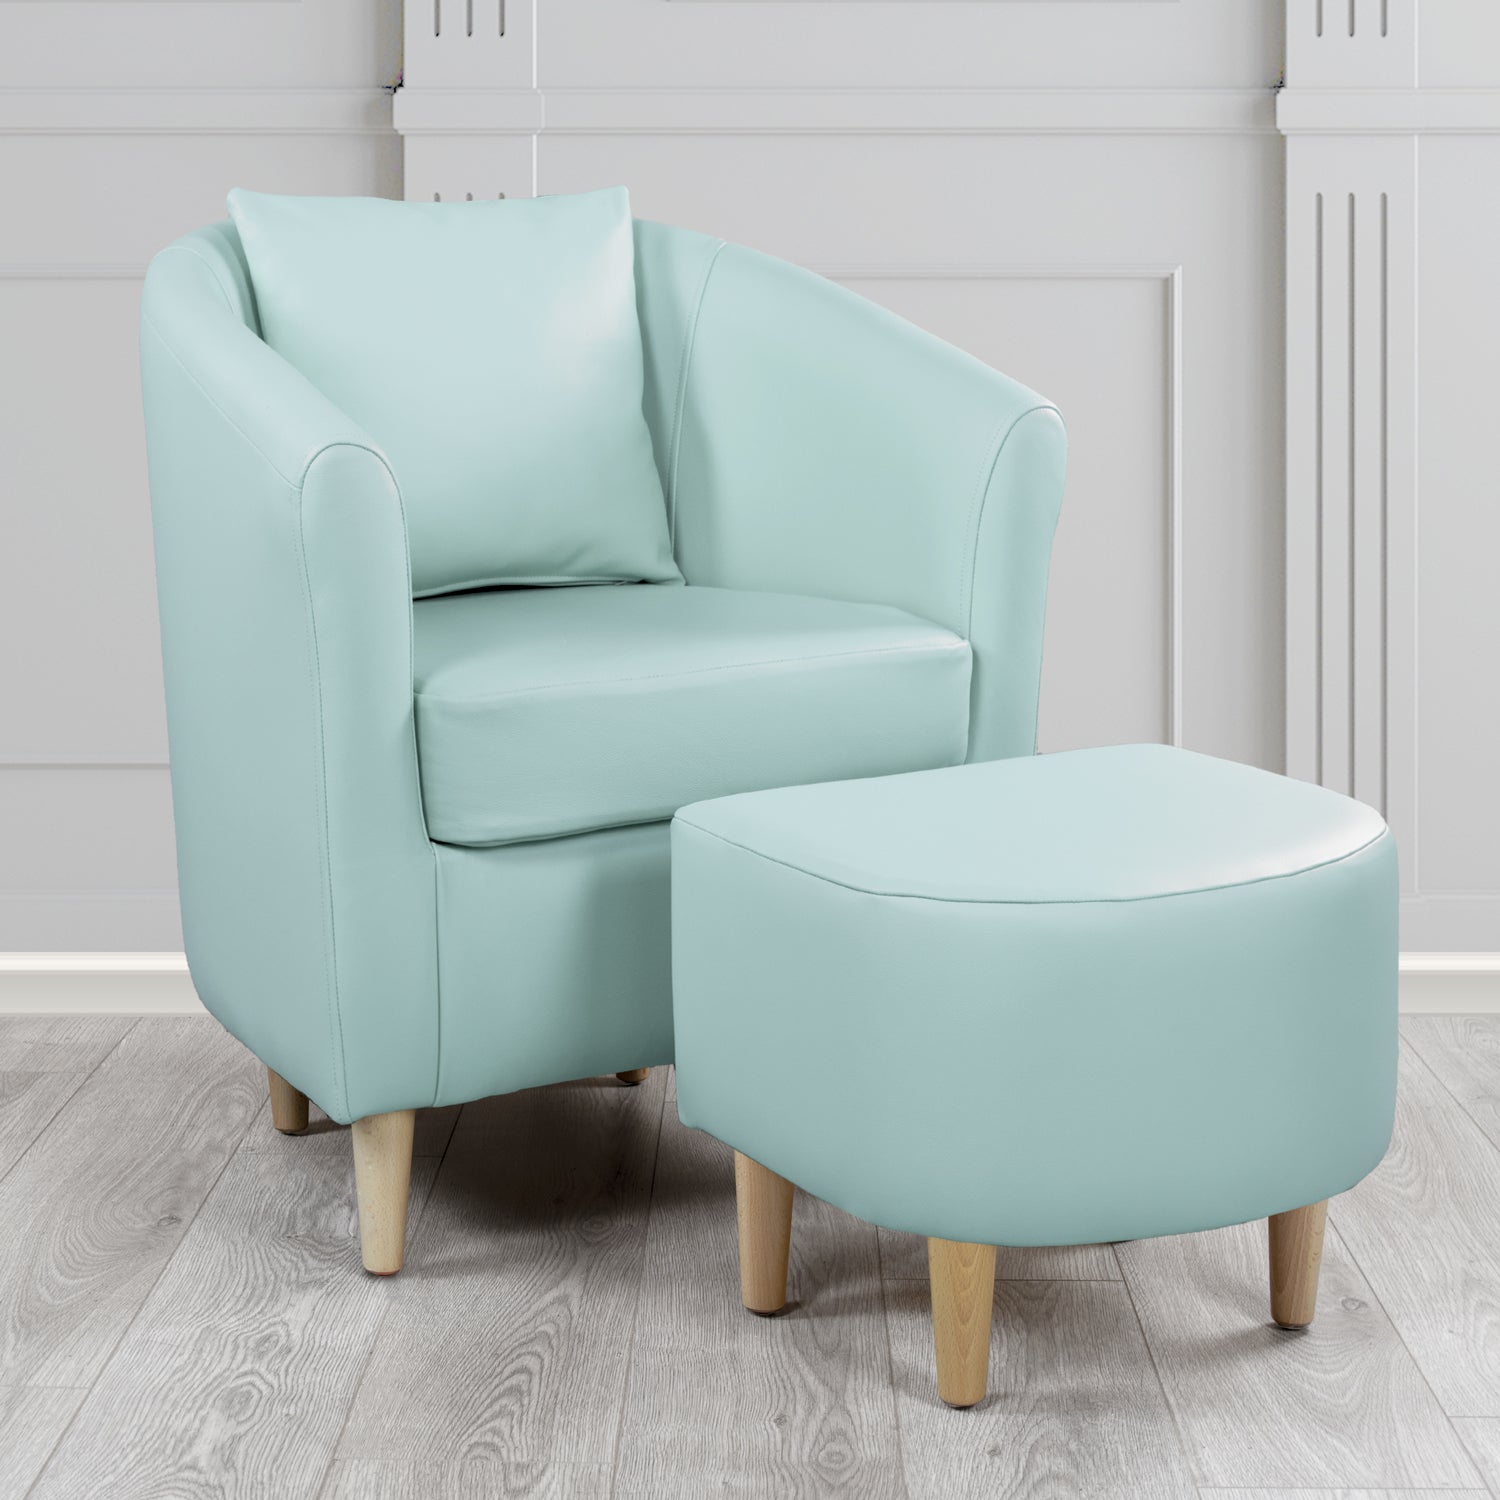 St Tropez Shelly Parlour Blue Crib 5 Genuine Leather Tub Chair & Footstool Set With Scatter Cushion (6619511390250)